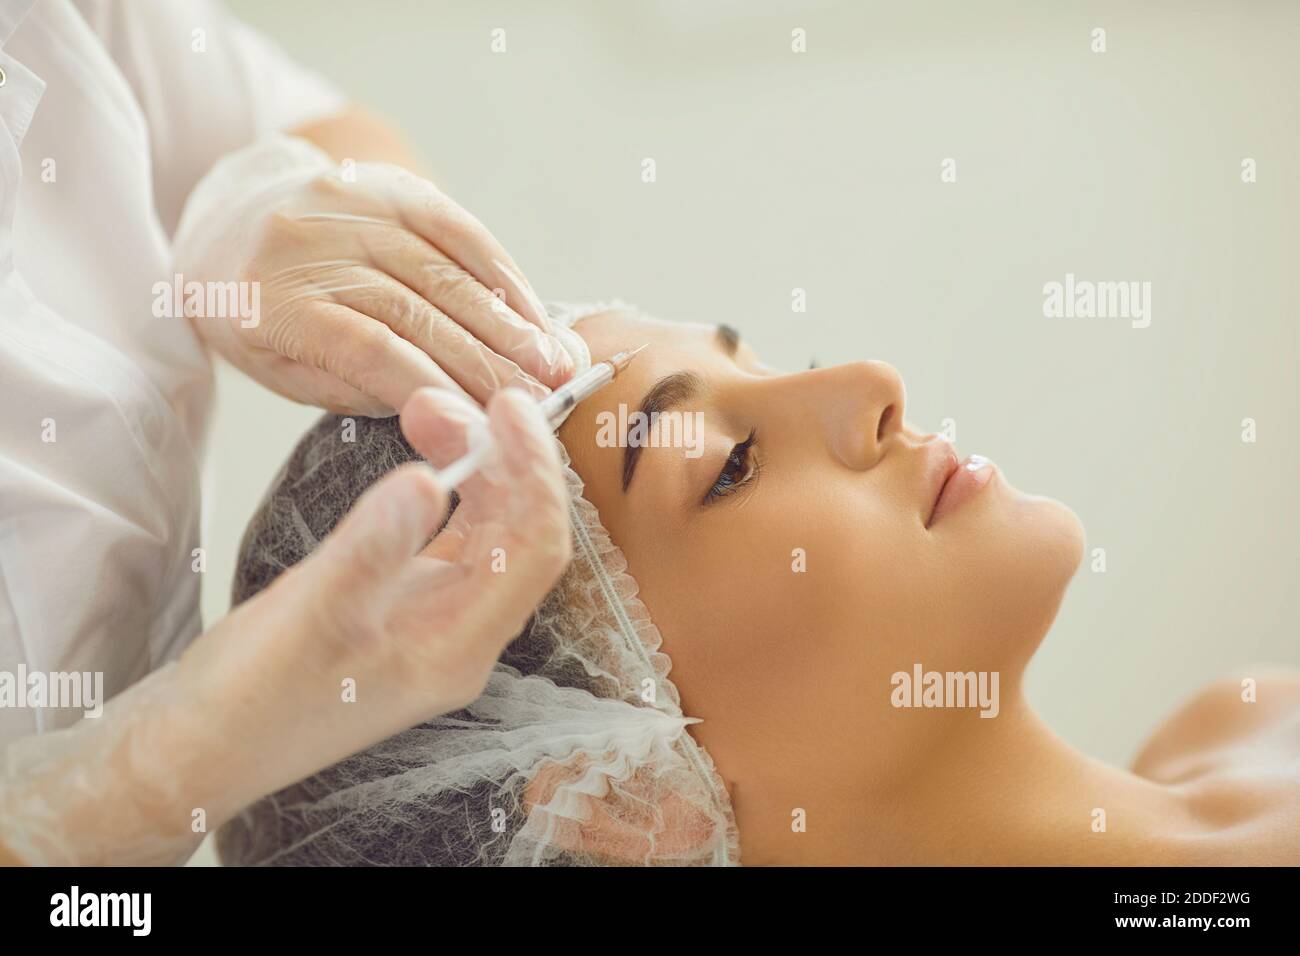 Woman recieving injection of anti-aging botox filler to forehead skin from professional cosmetologist Stock Photo